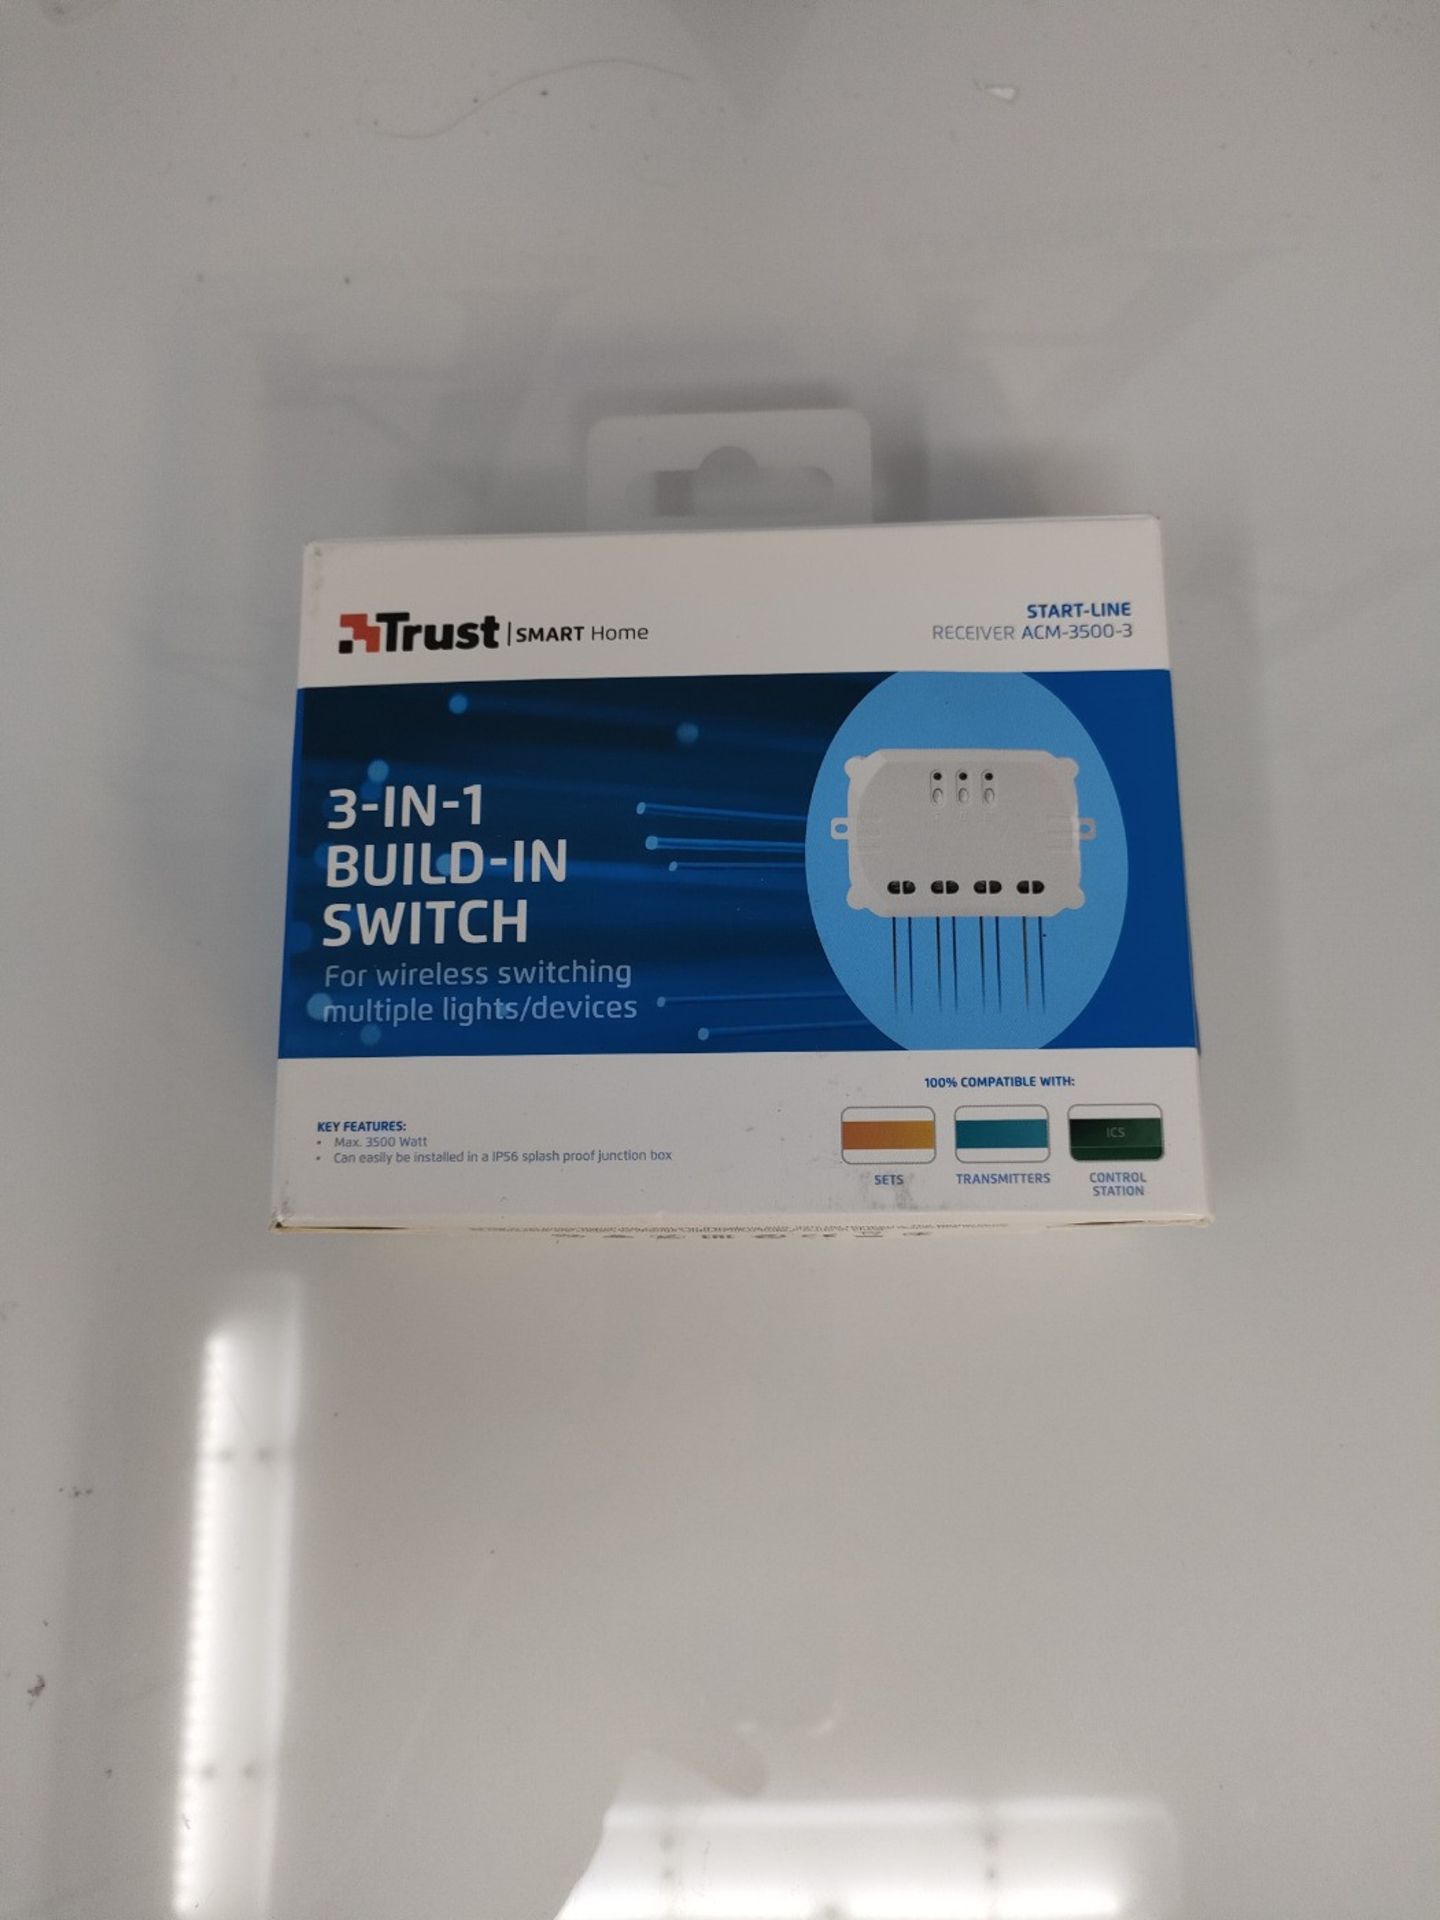 Trust 71053 Smart Home 433 MHz wireless 3-in-1 built-in switch total power ACM-3500-3 - Image 2 of 3